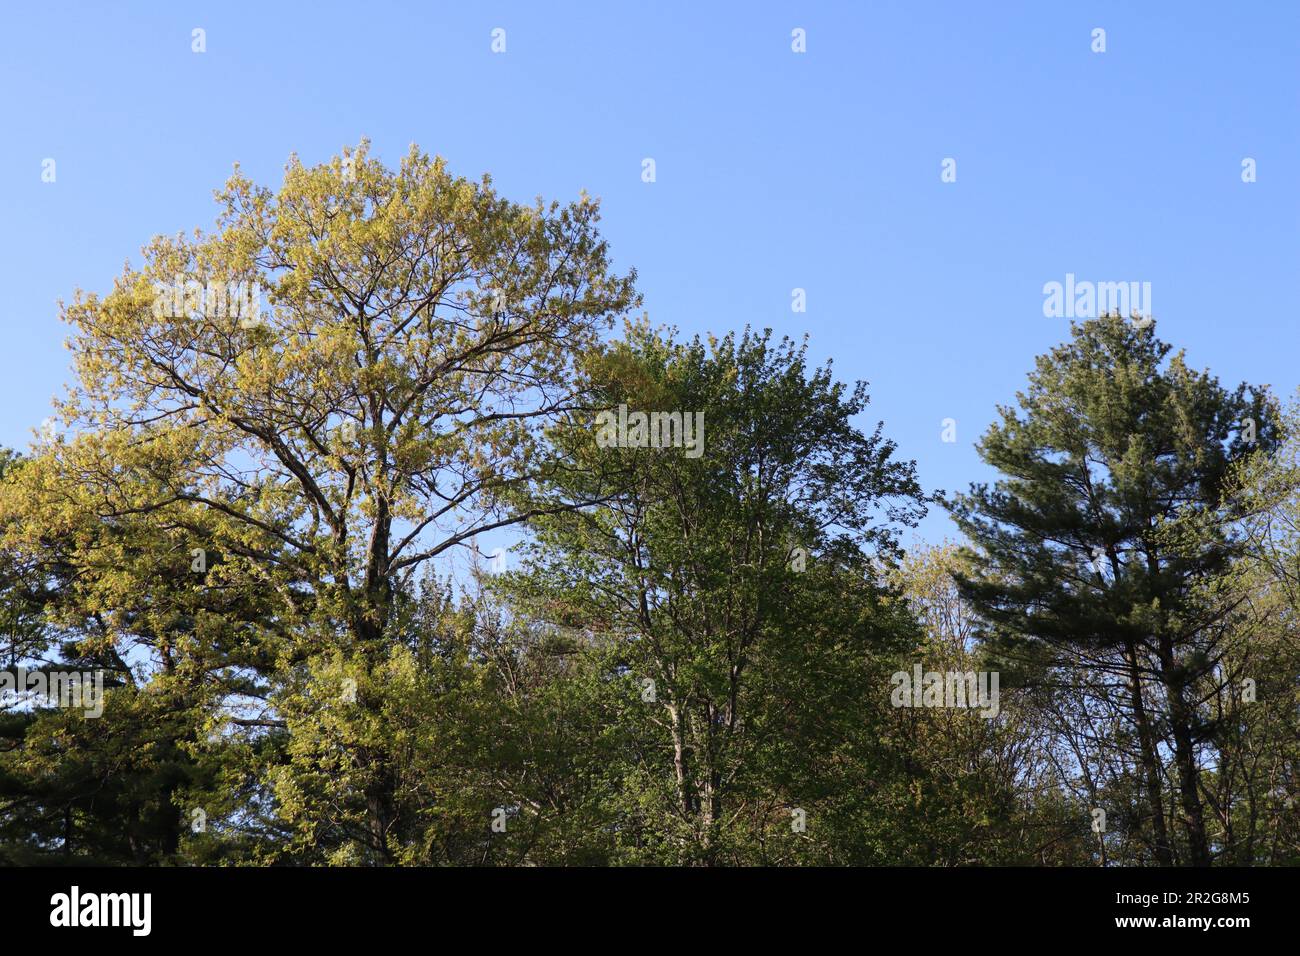 A few pretty trees with a beautiful blue sky in the clear, sunny, and crisp outdoors on a nice day Stock Photo